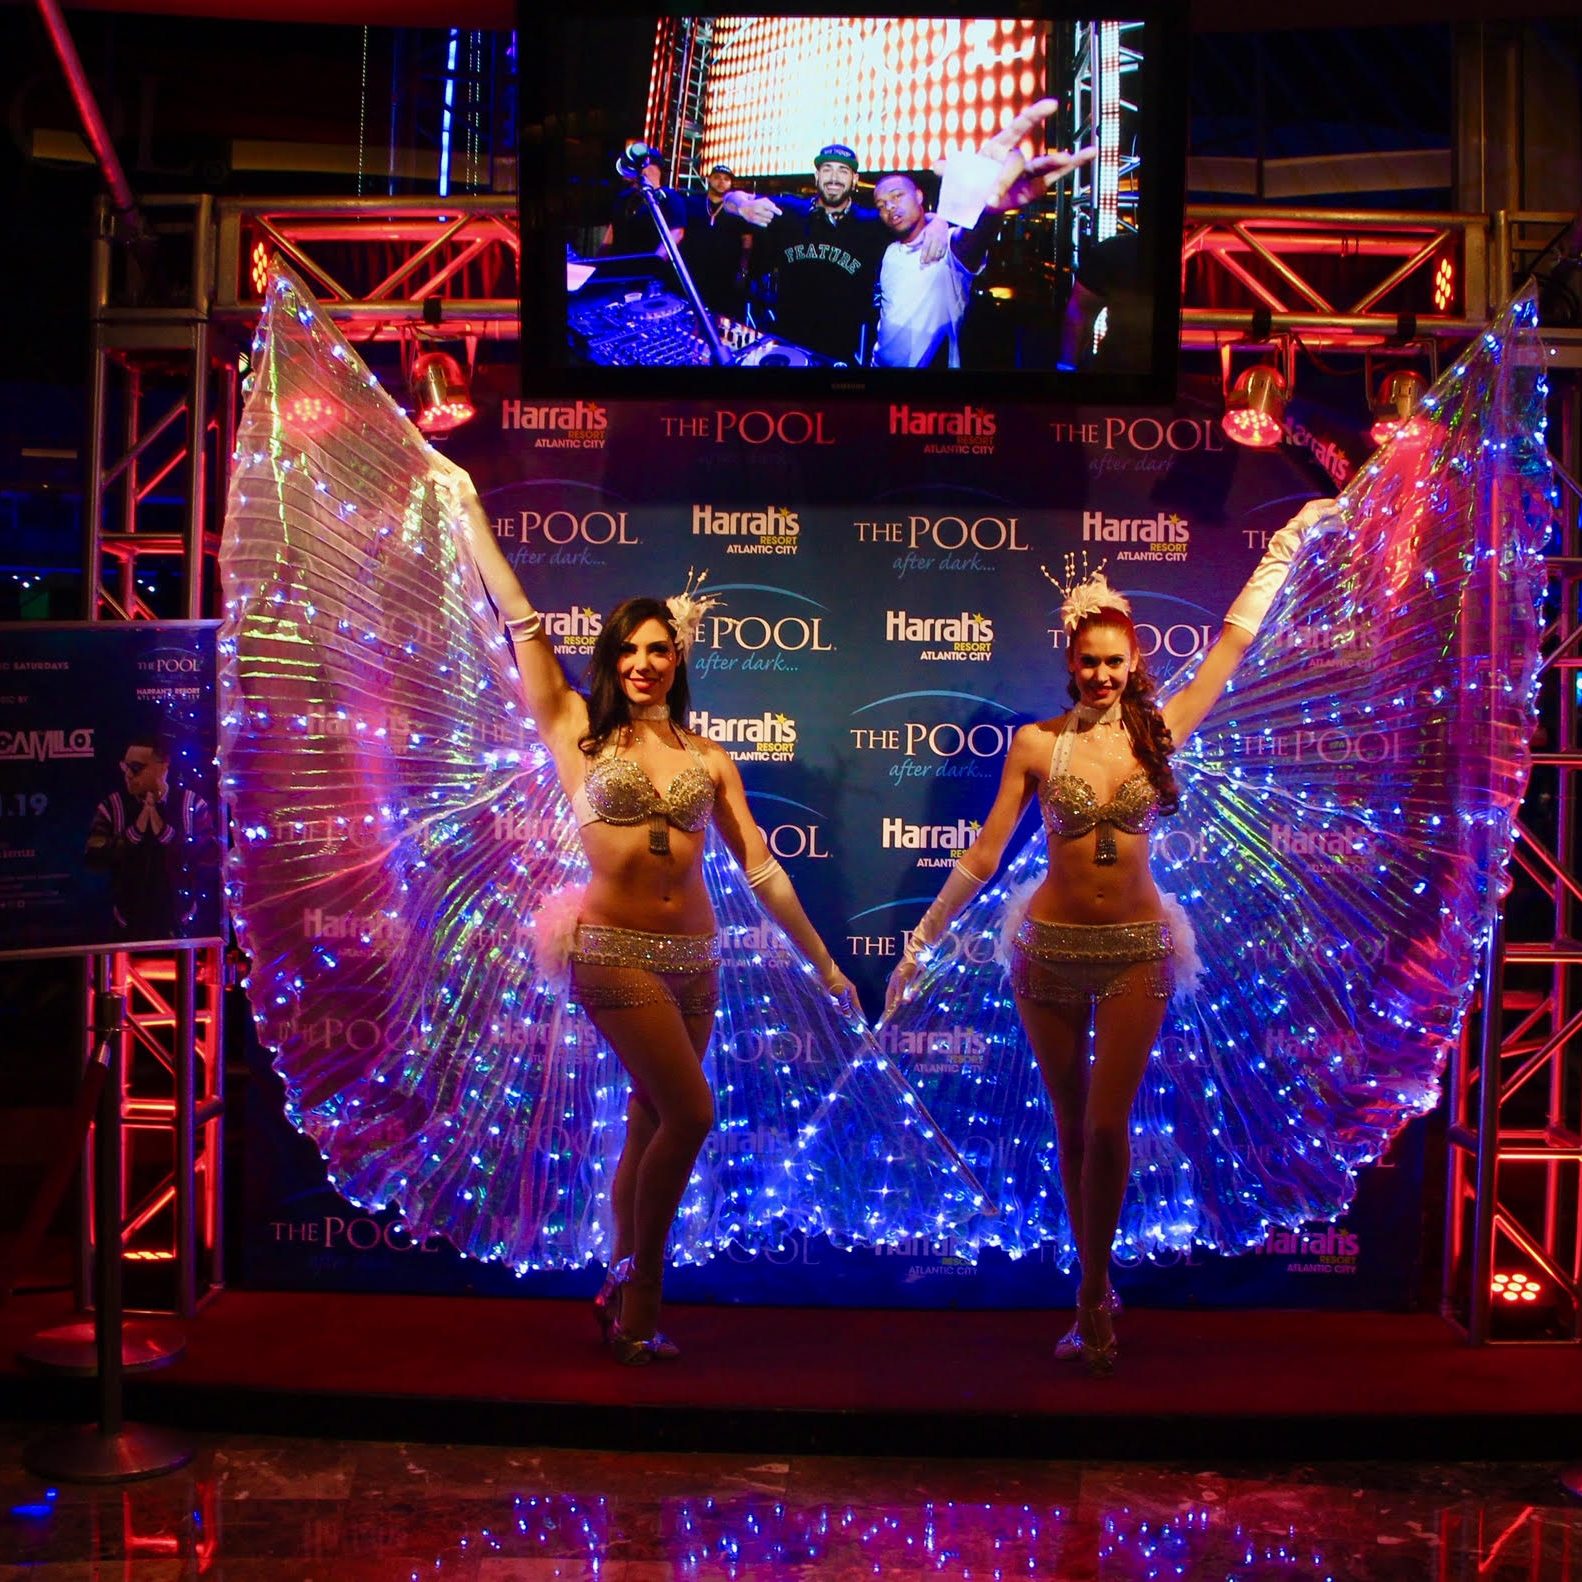 Two performers with led-lit wings stand on a stage at harrah's pool event, smiling and posing in front of a colorful backdrop.